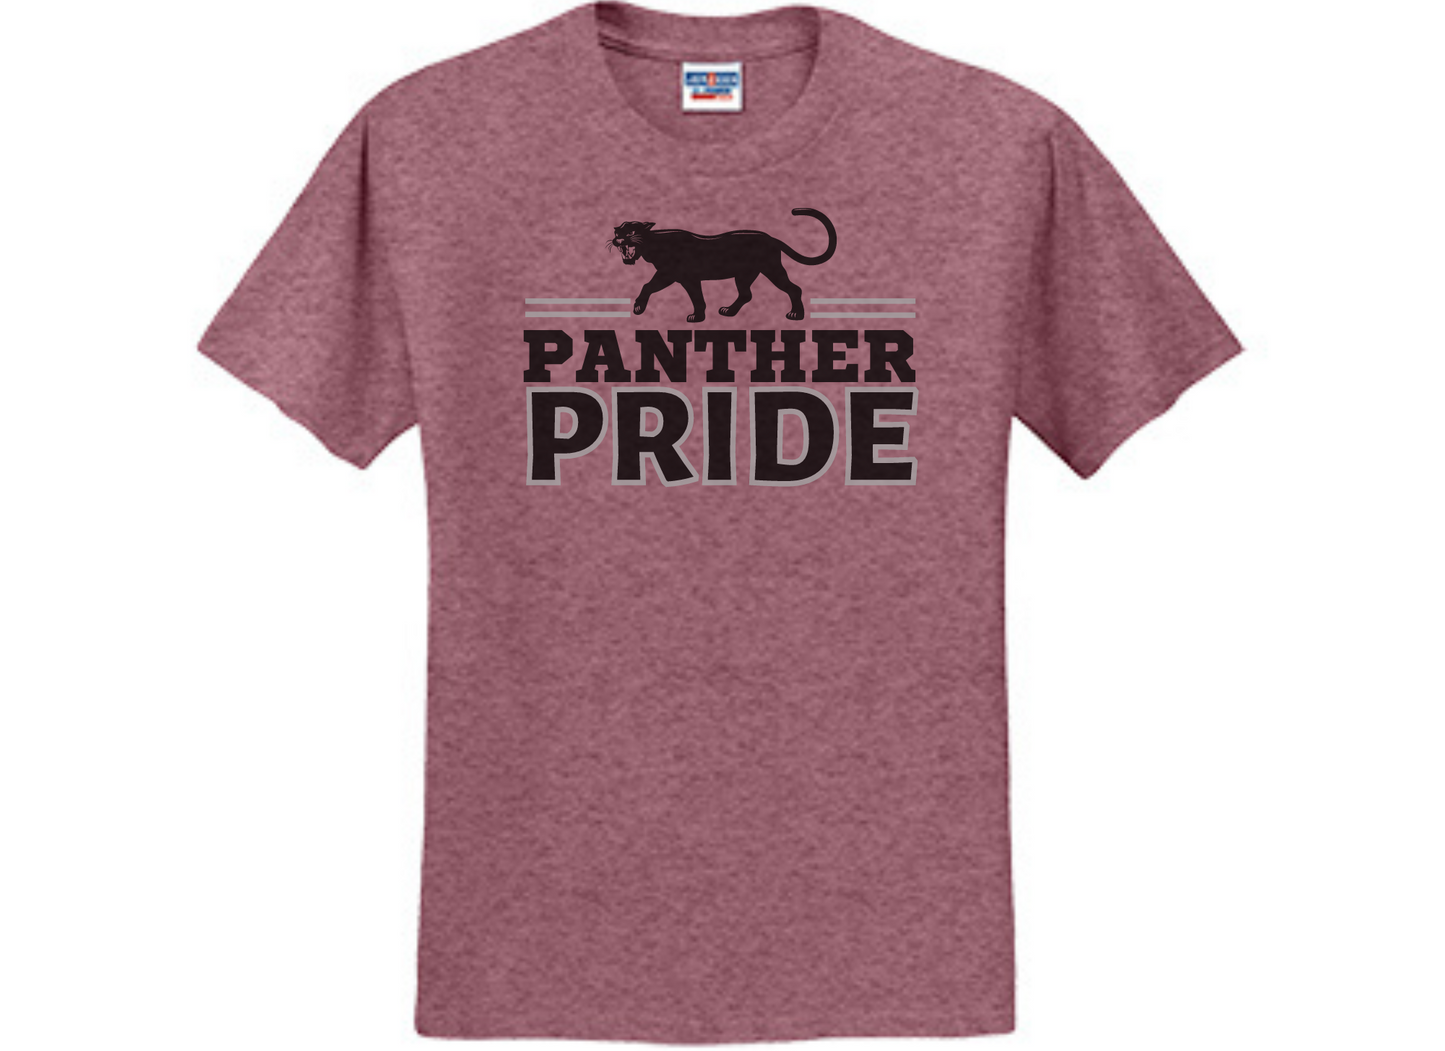 Adult Panther Pride T-Shirt